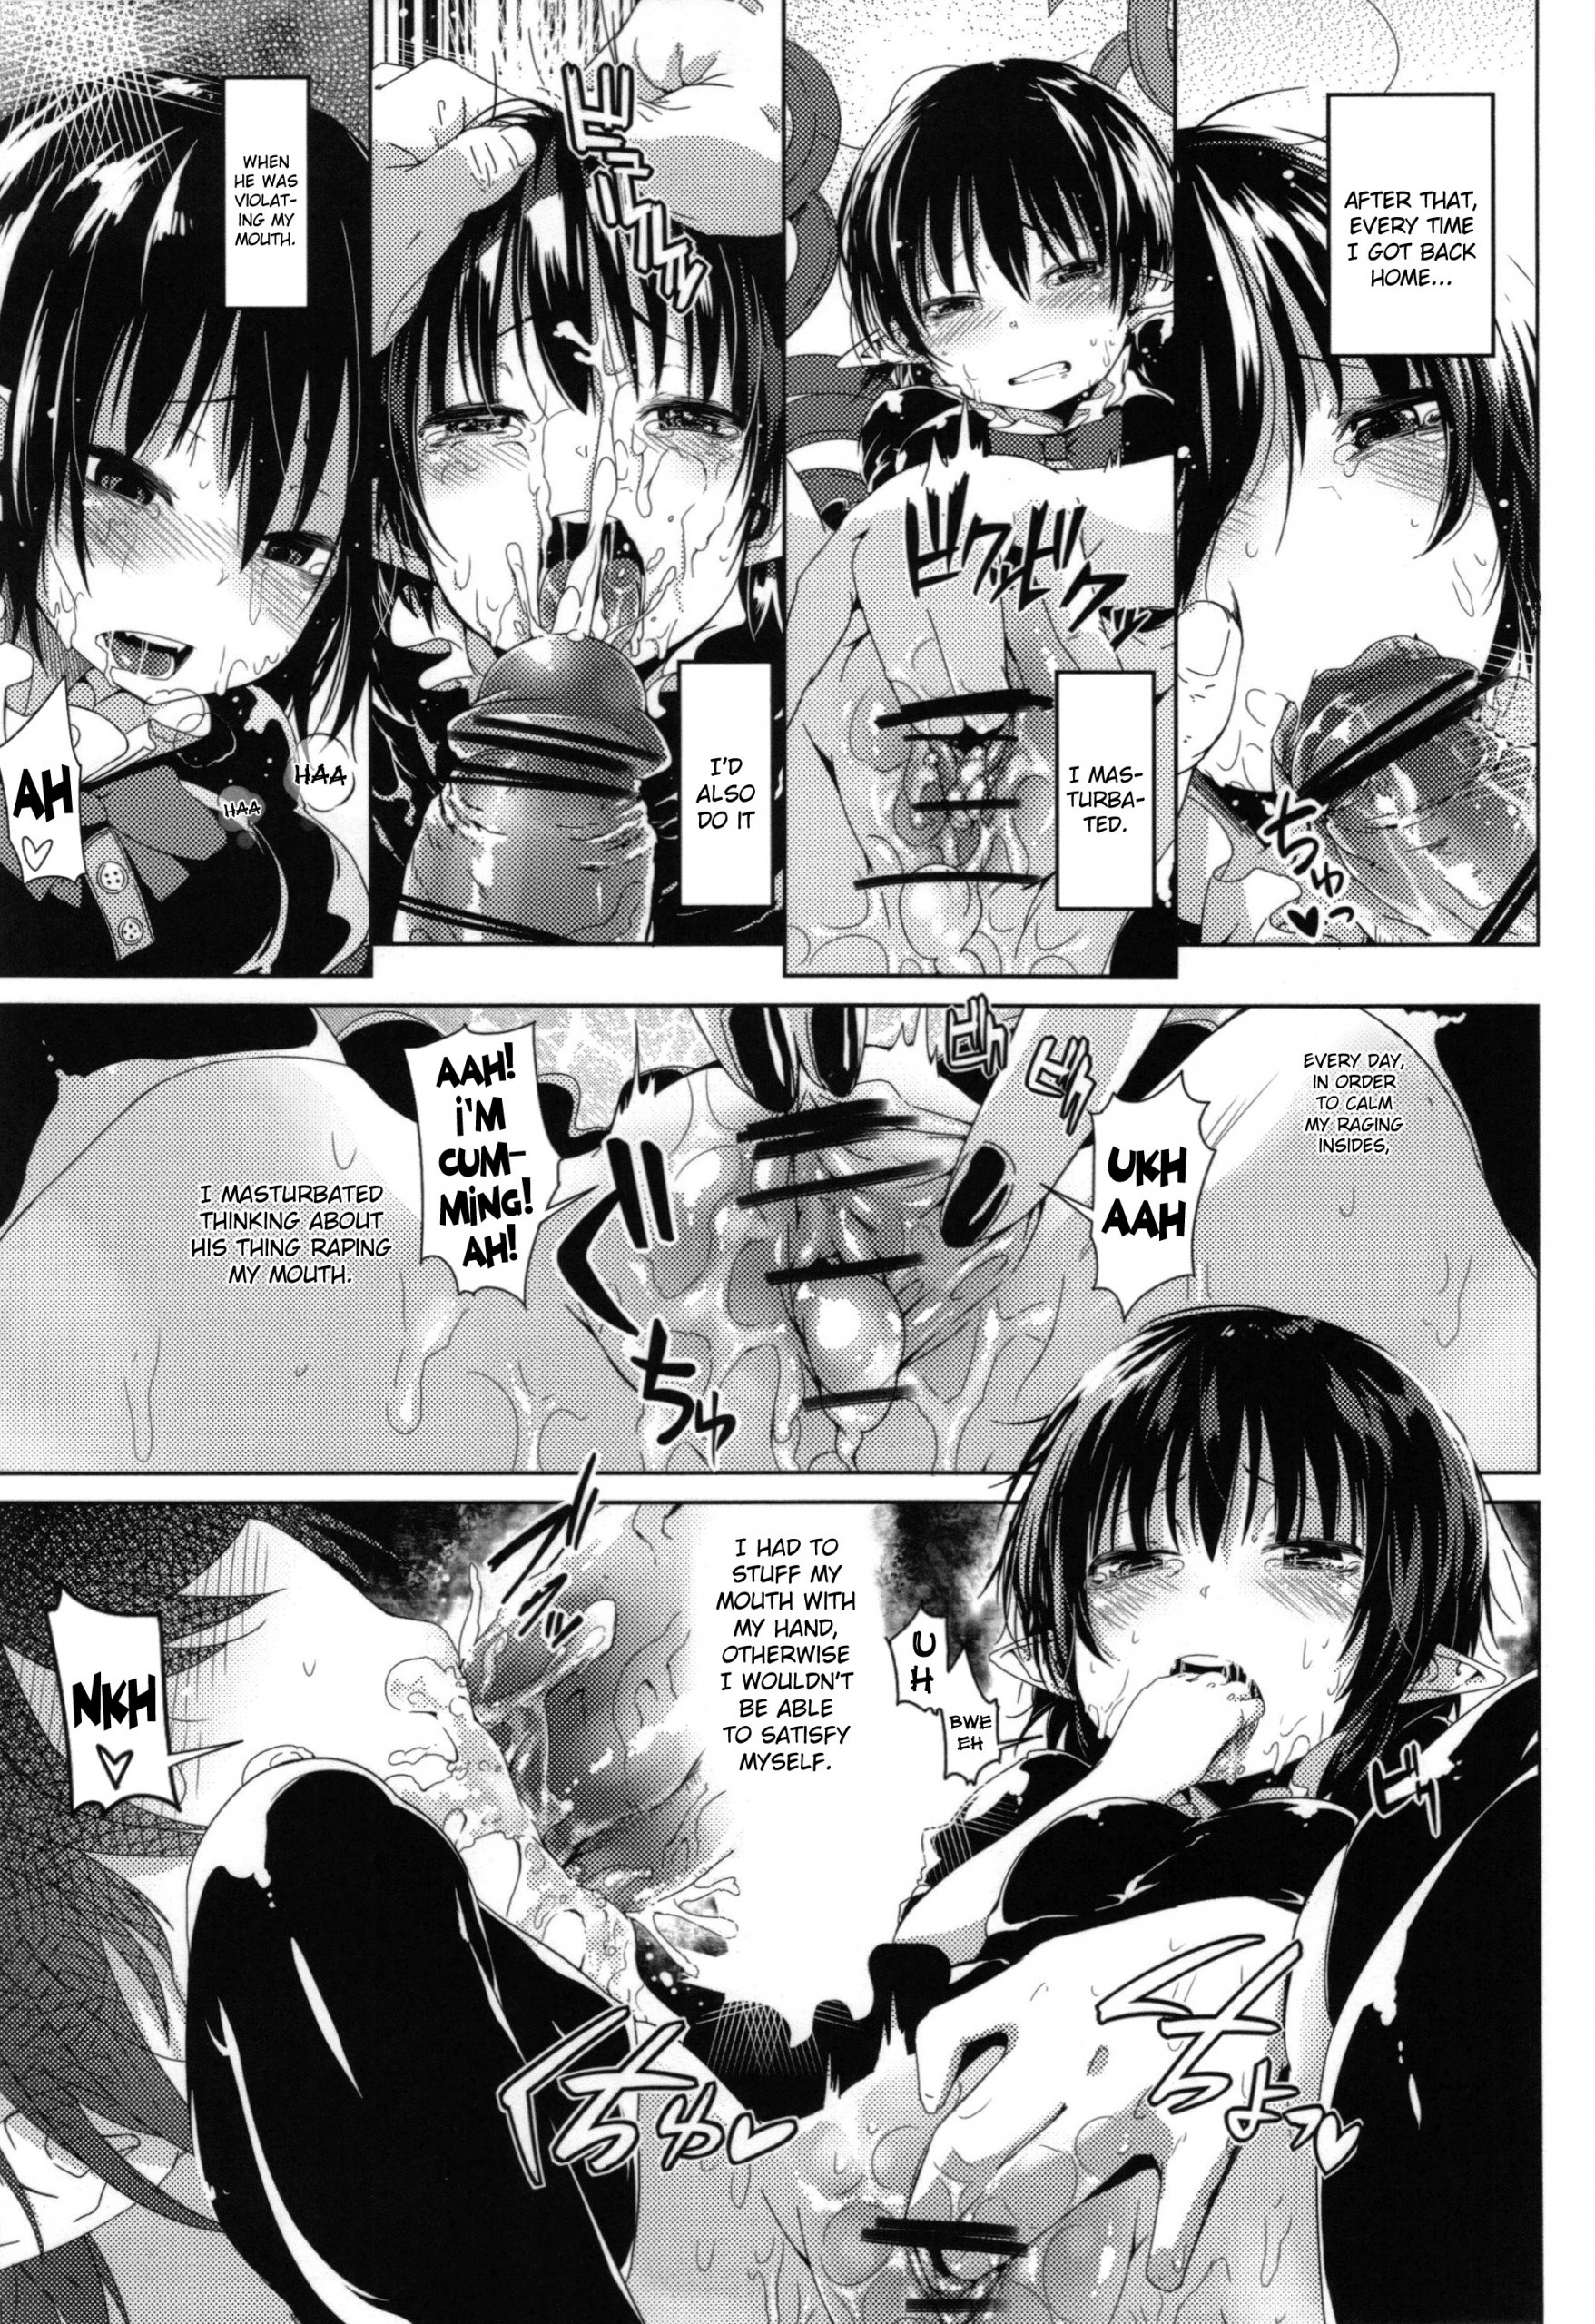 Her Mouth's Lover hentai manga picture 10